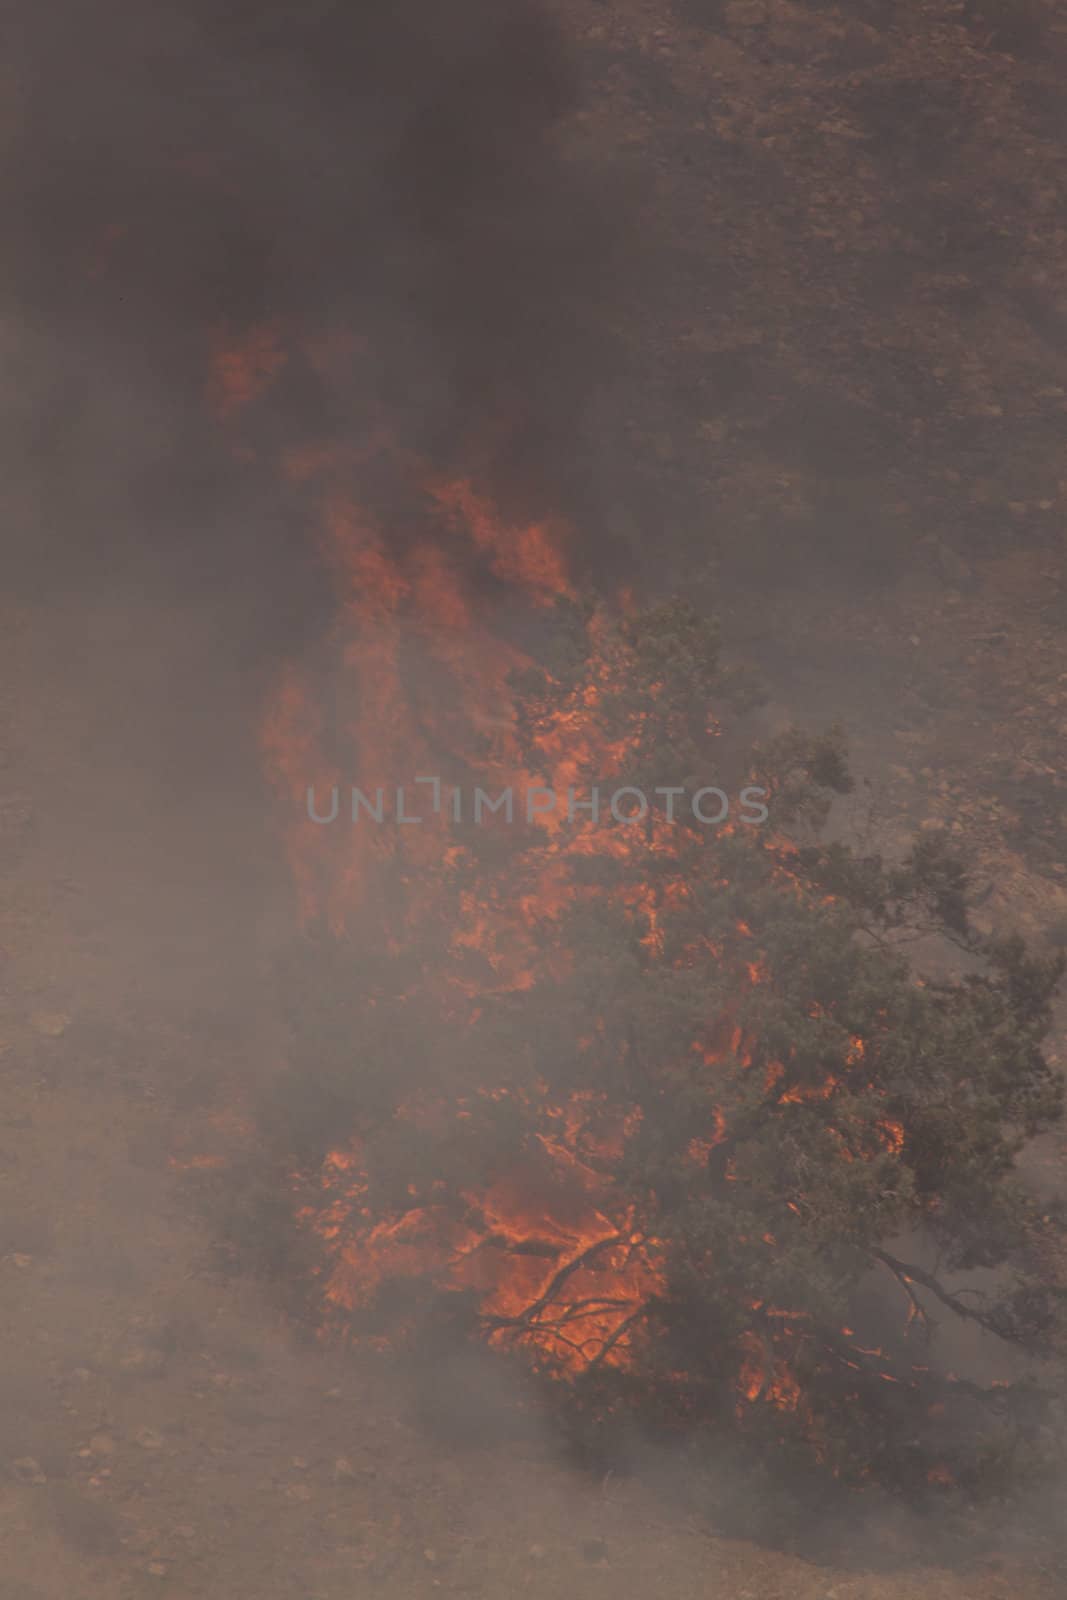 Desert fire with burning bushes and brush